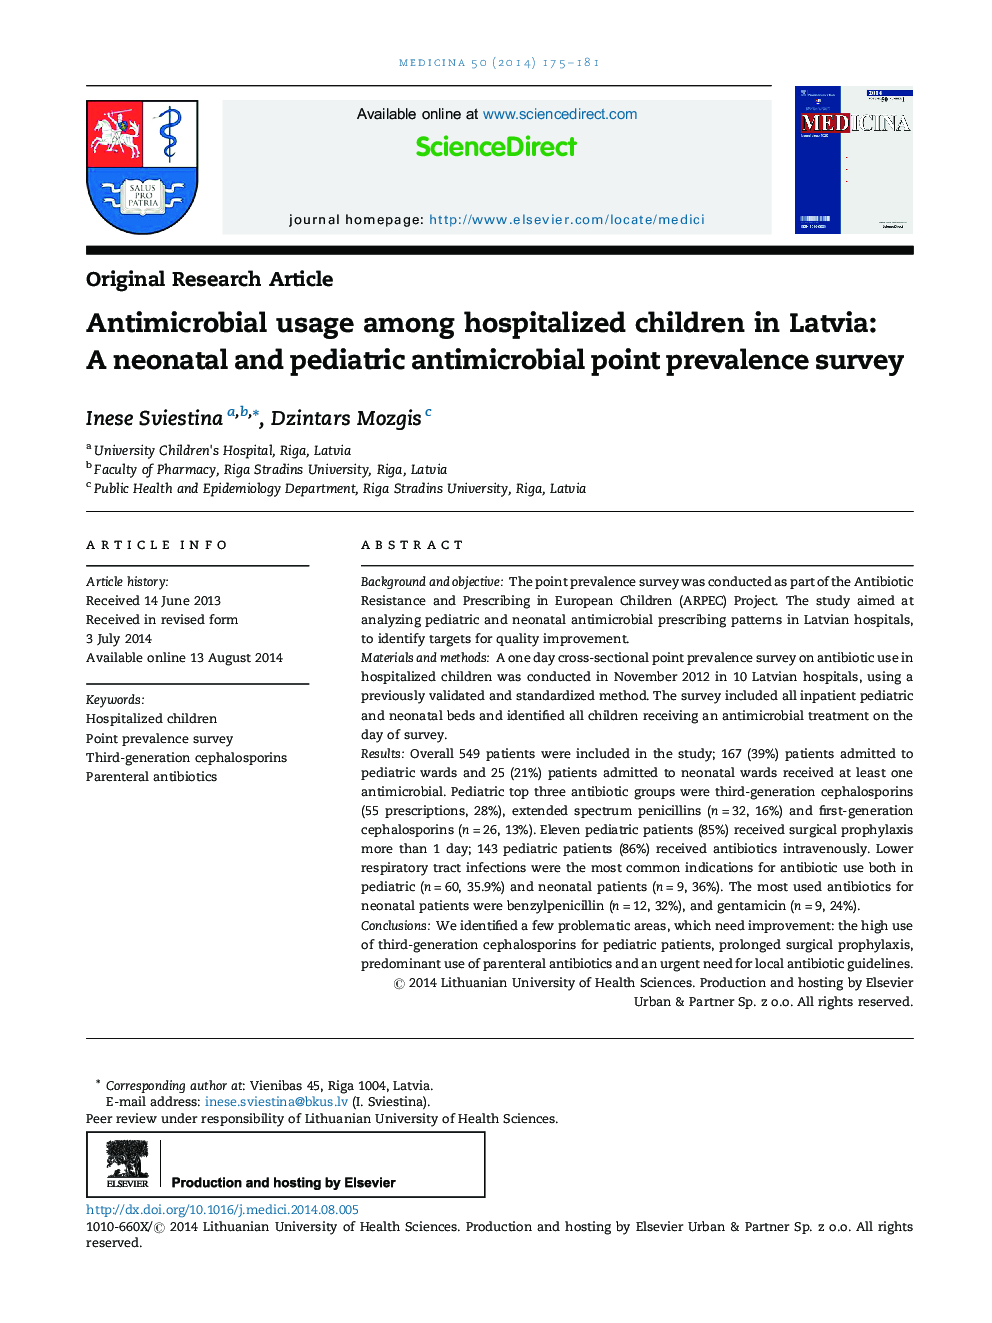 Antimicrobial usage among hospitalized children in Latvia: A neonatal and pediatric antimicrobial point prevalence survey 